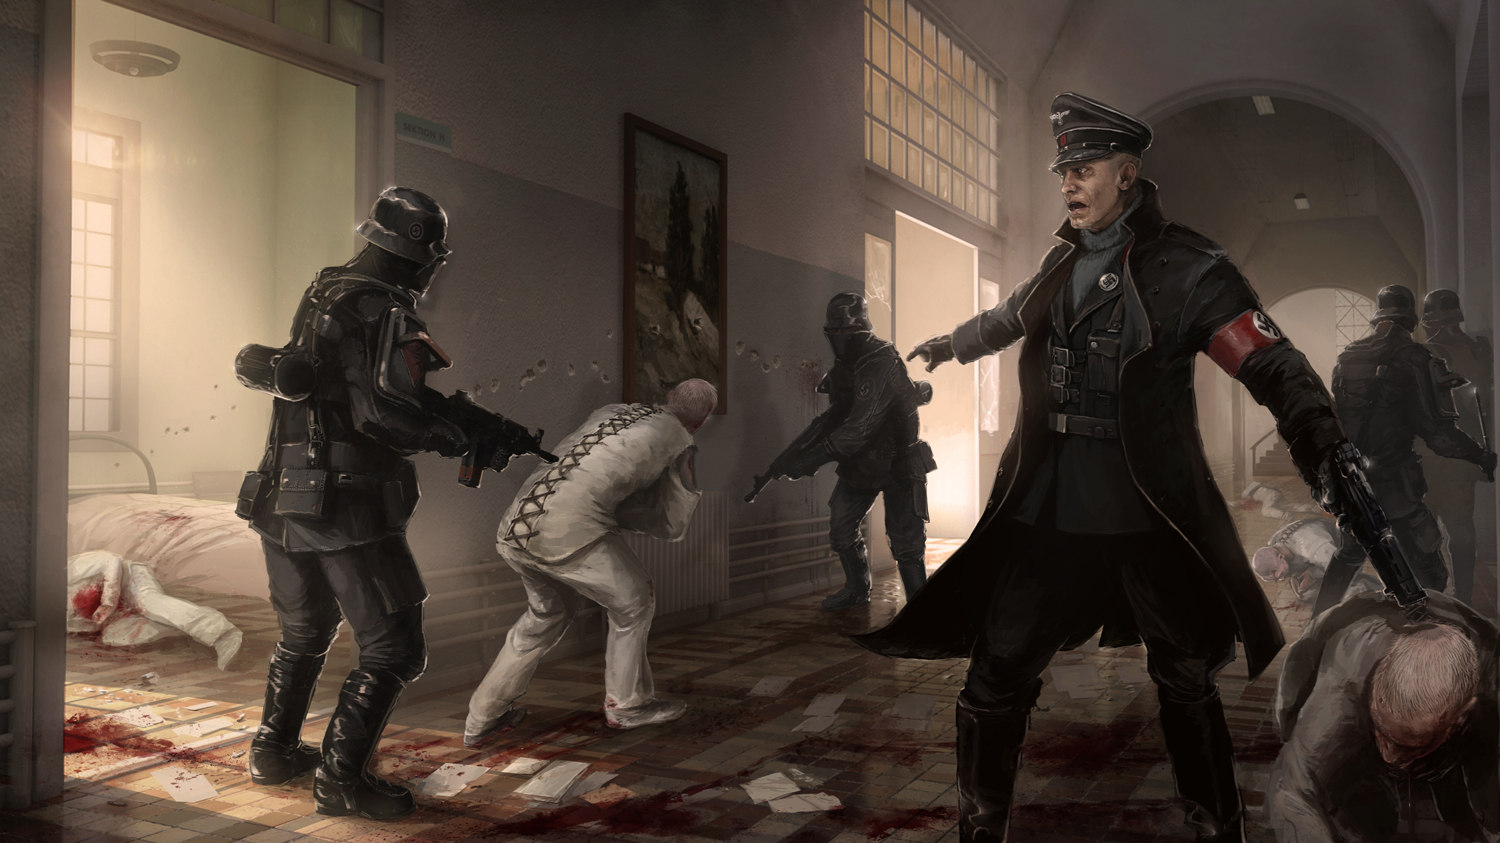 Wolfenstein The New Order Wiki : Everything you need to know about